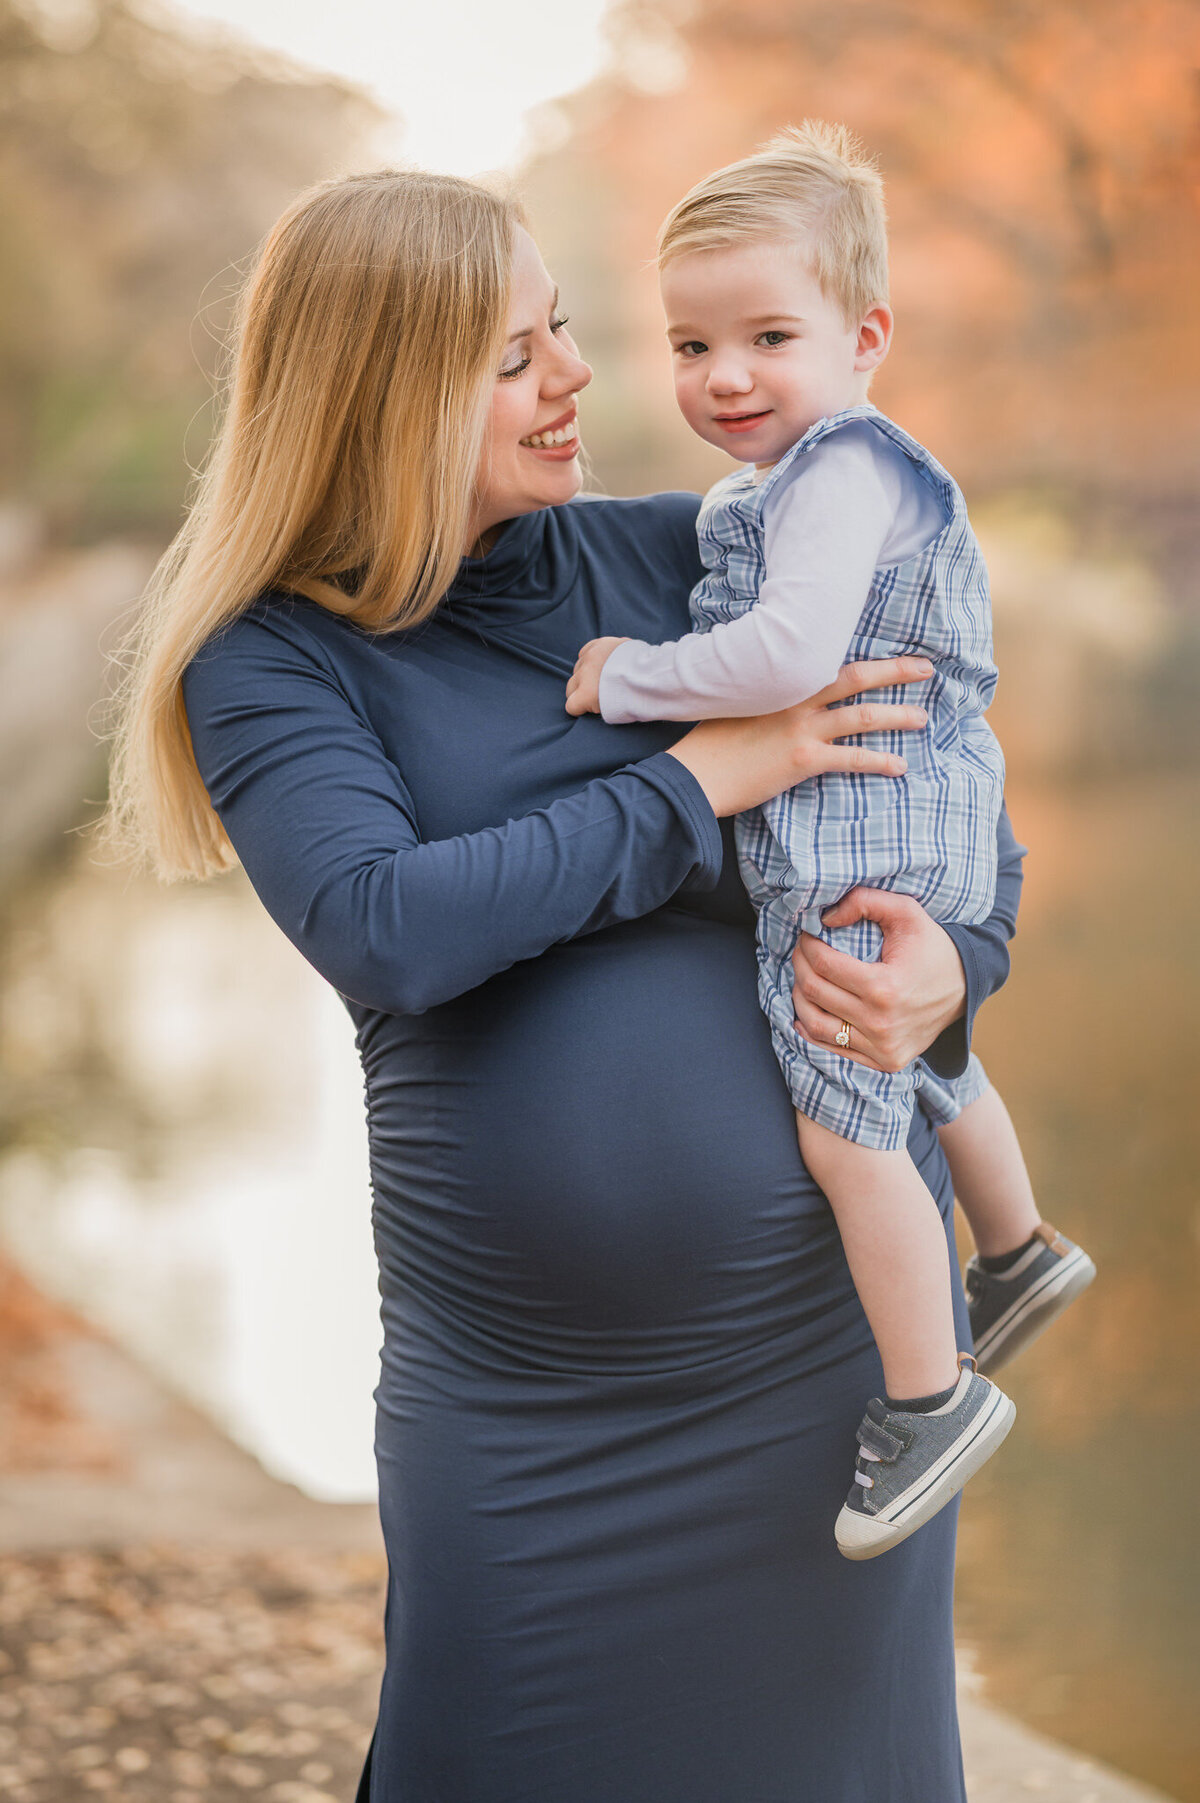 Pregnant woman holds her toddler and smiles at him during maternity pictures at Brackenridge Park in San Antonio.